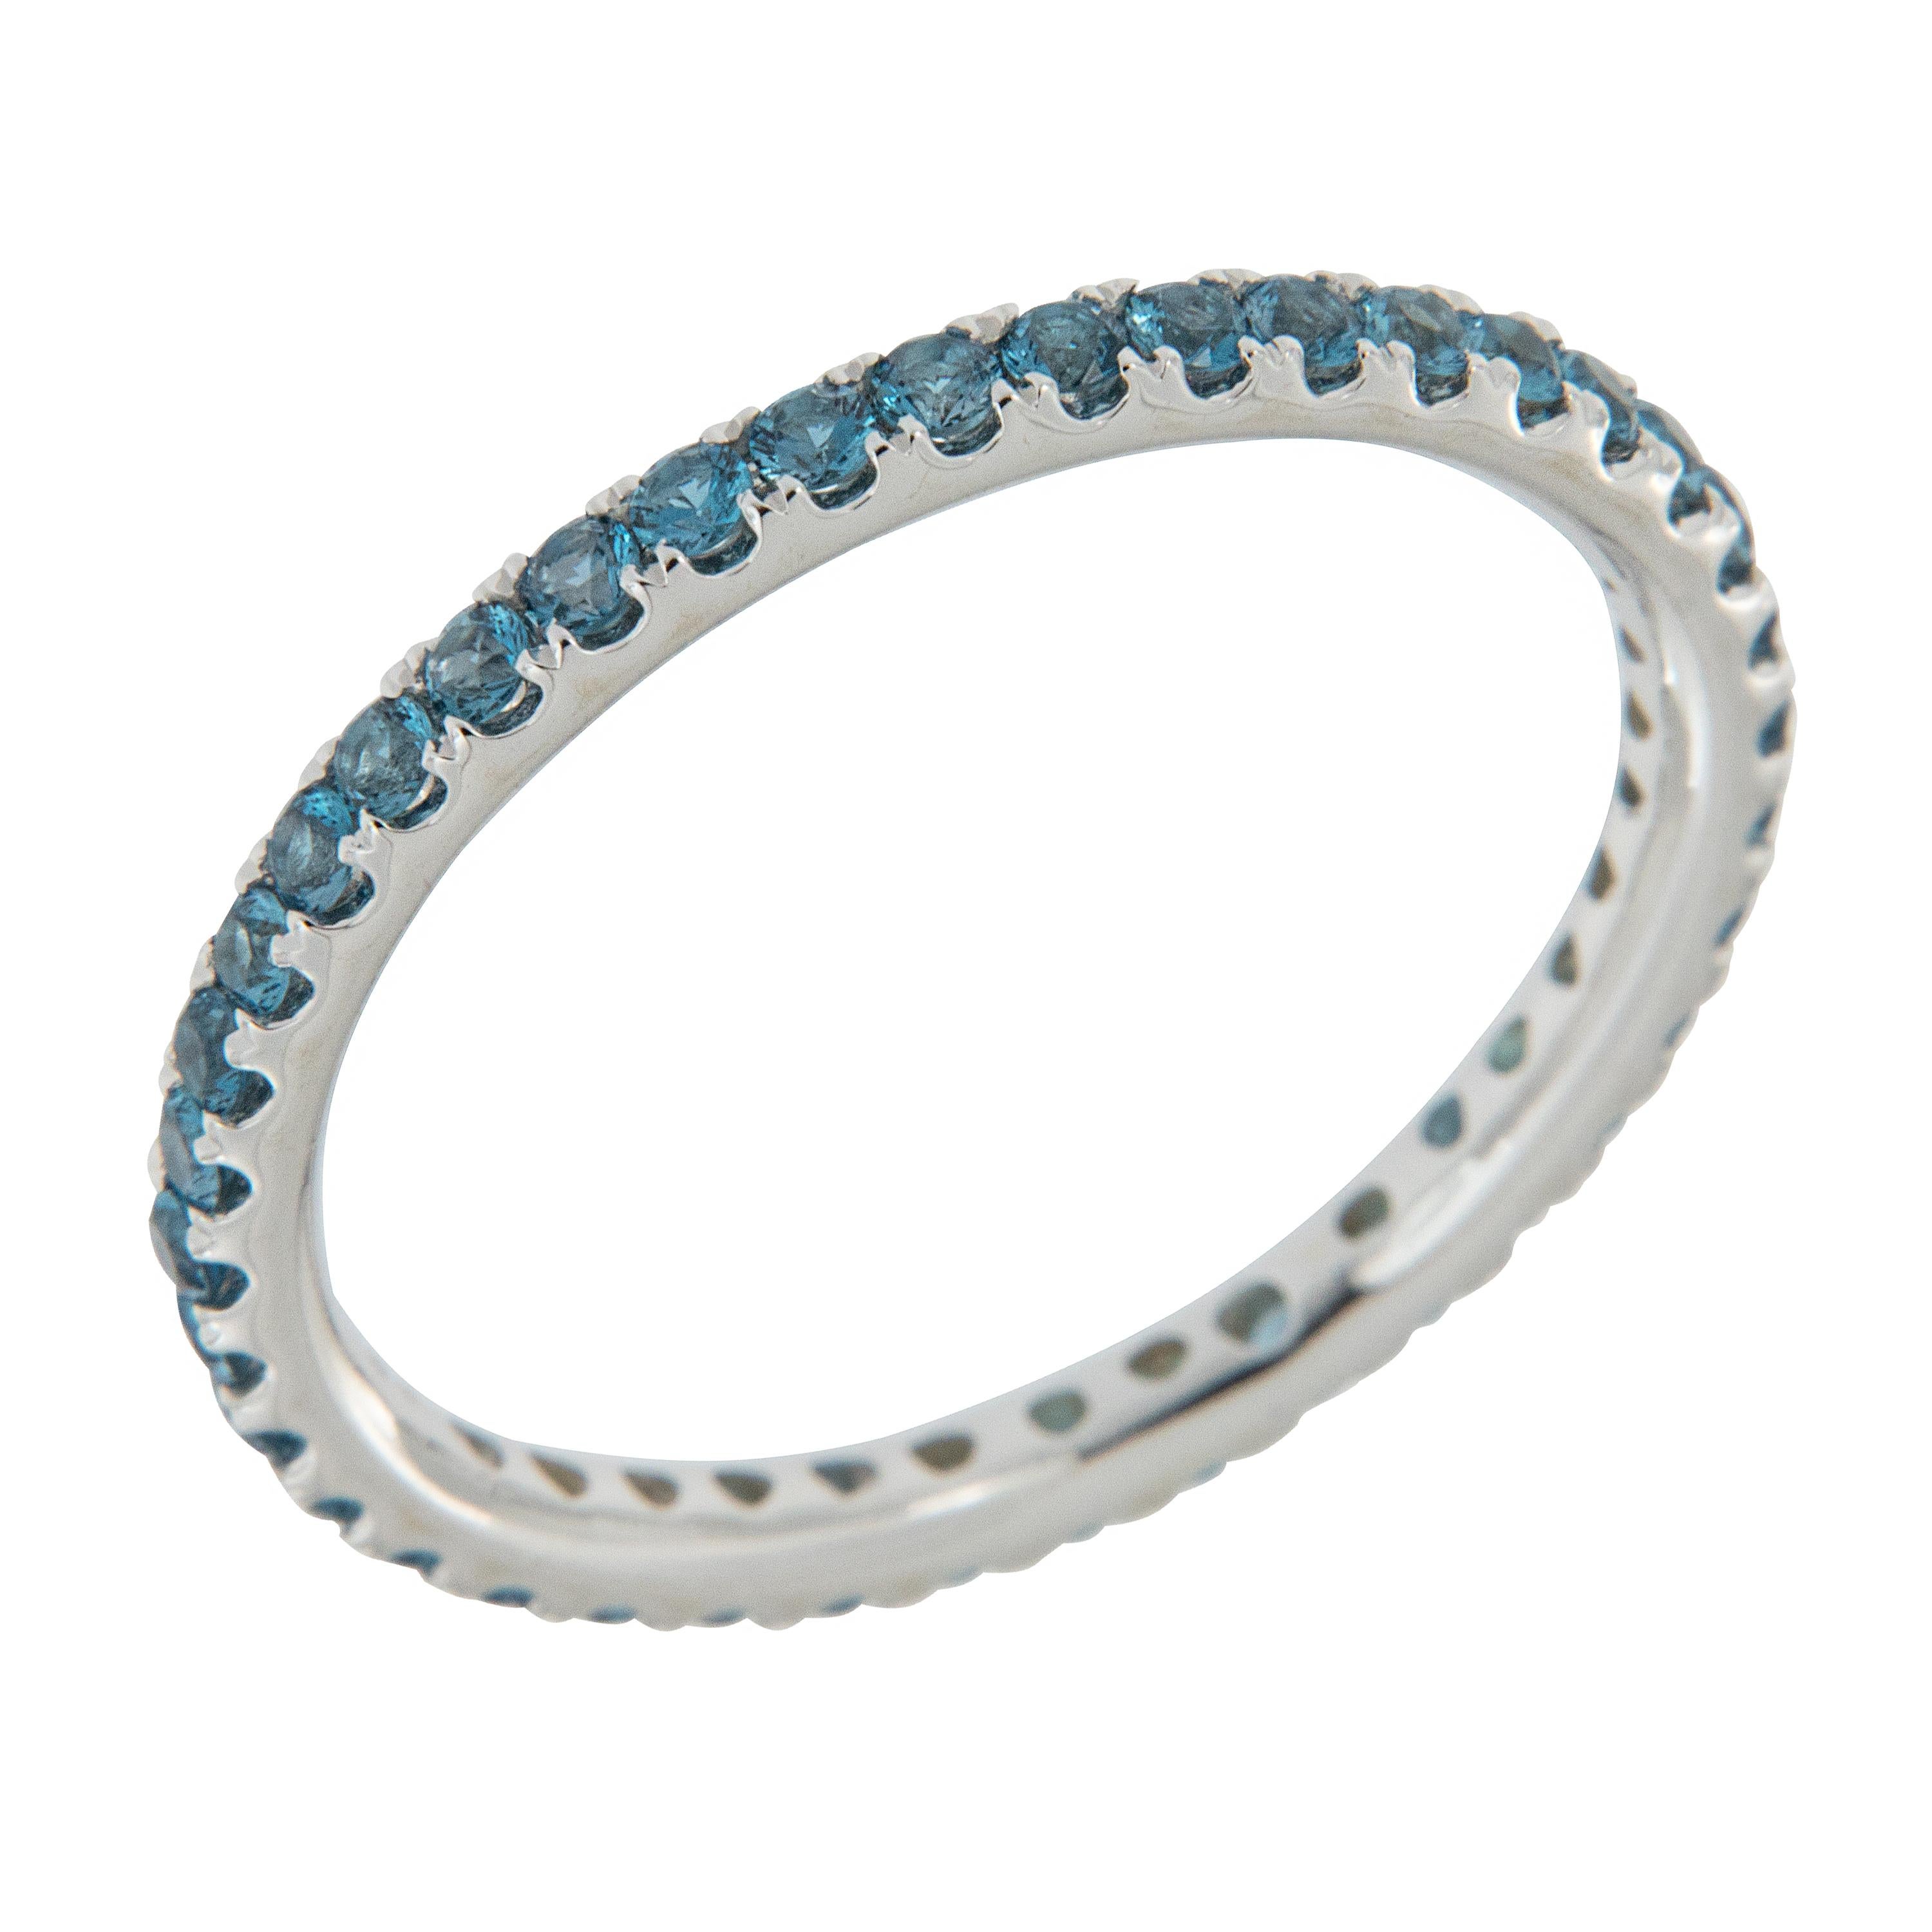 Soothing blue is this 18 karat white gold blue topaz eternity ring with 38 topaz = 1.20 Cttw in a size 6.00! Blue Topaz is a birthstone for December  and is the suggested anniversary gemstone for the 4th, 19th or 23rd year of marriage. This ring